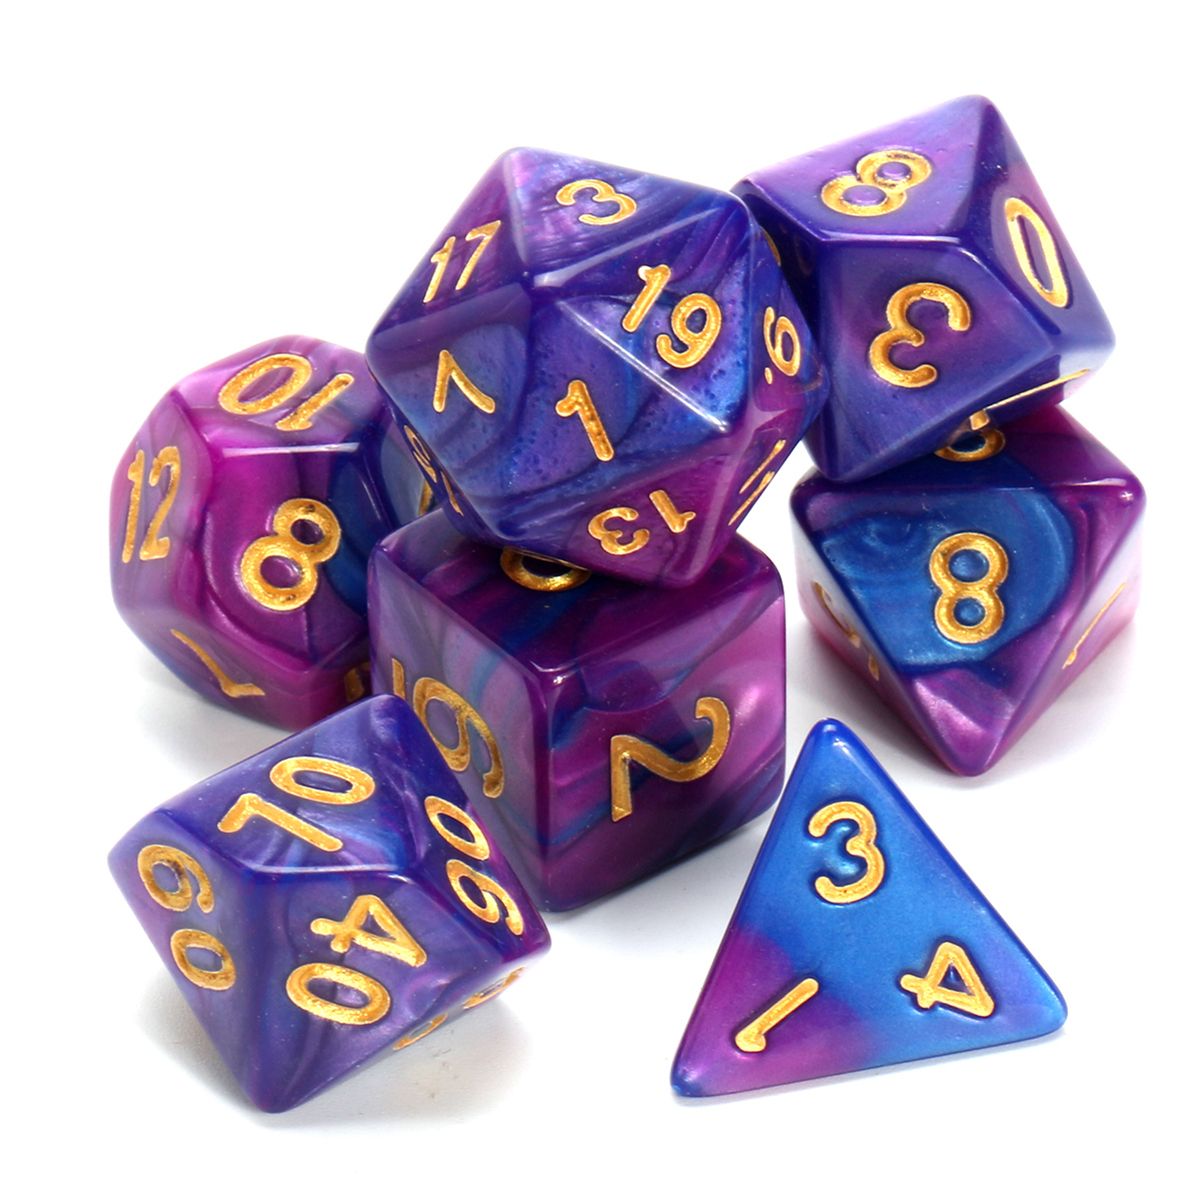 Polyhedral-Dice-PurpleampBlue-7-Piece-DampD-RPG-MTG-Party-Game-Toy-Set-1231736